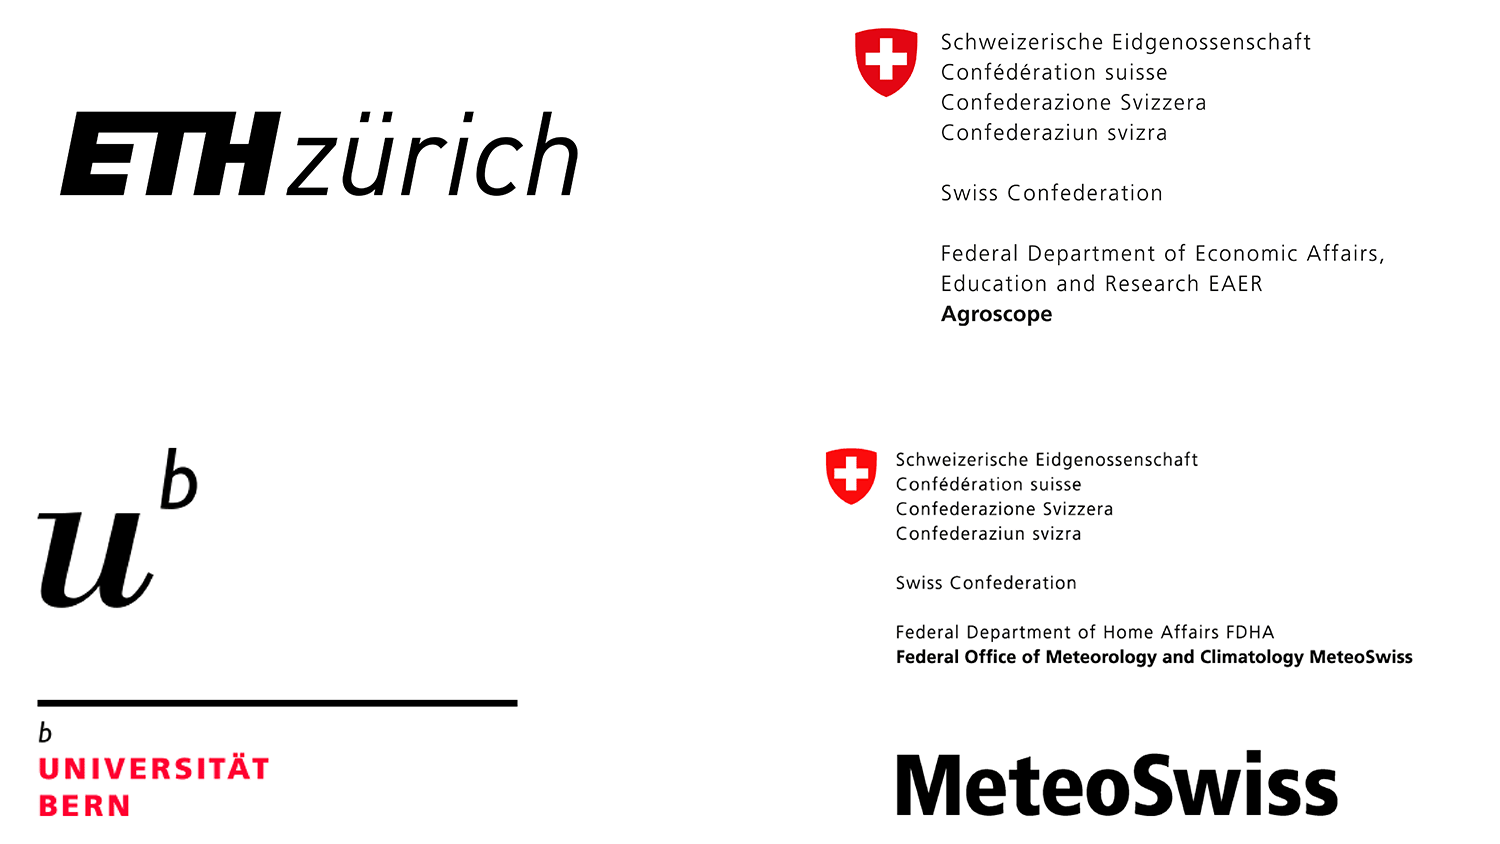 Logos of ETH Zurich, Agroscope, University of Berne, and MeteoSwiss are displayed